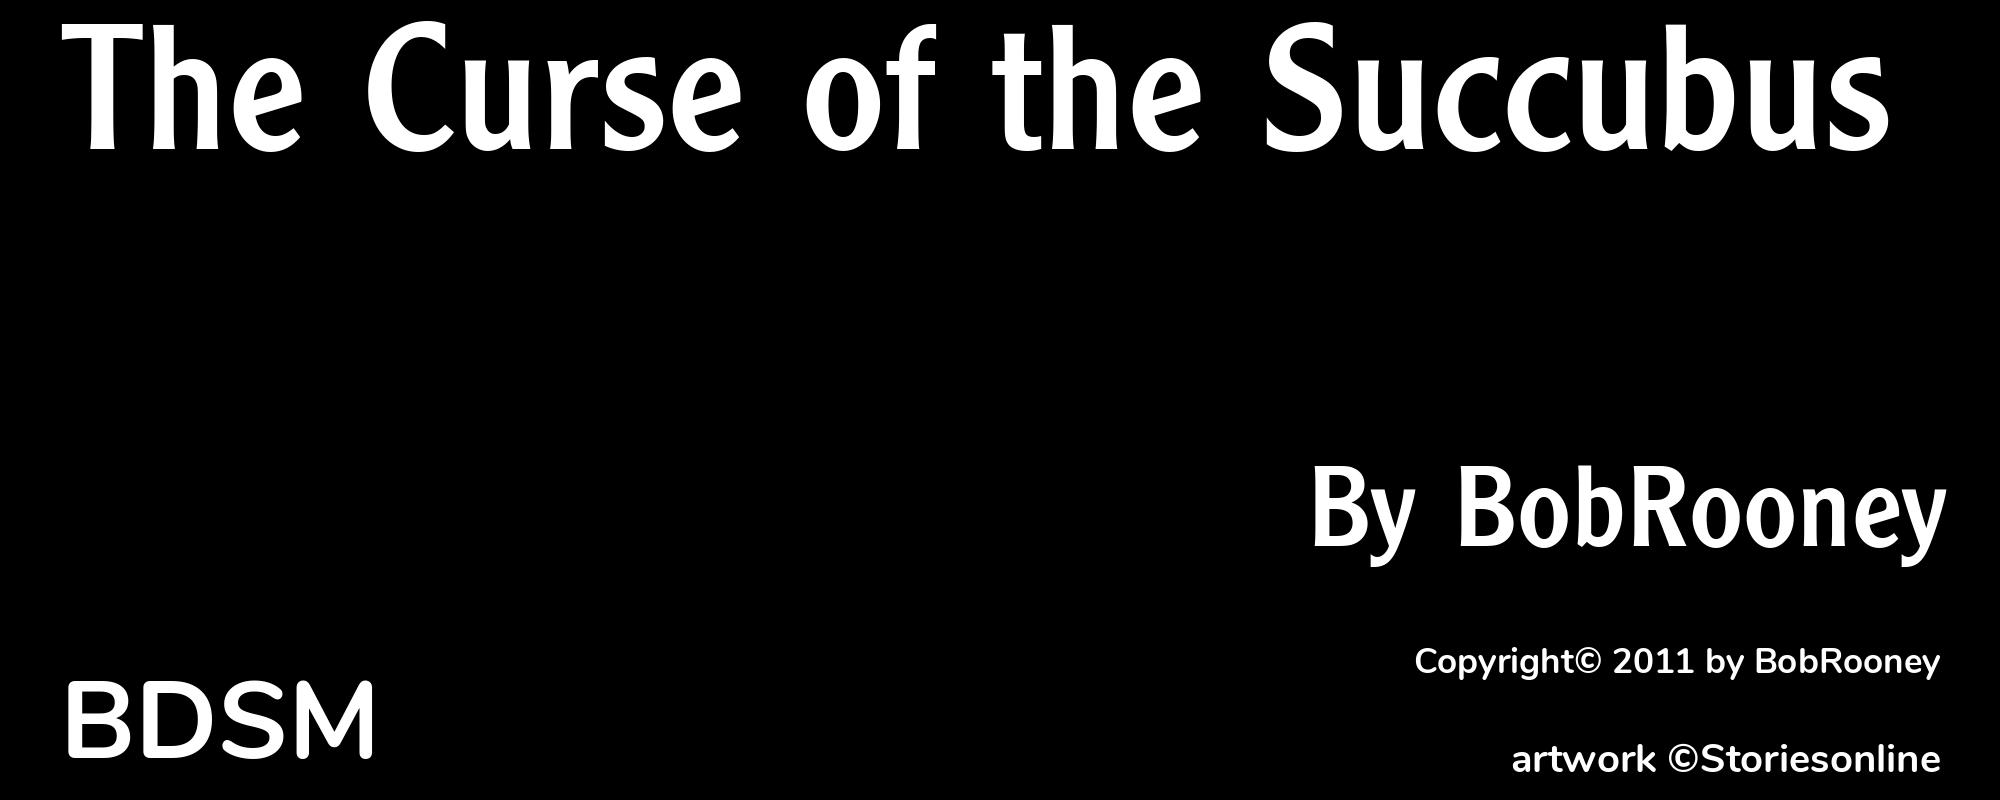 The Curse of the Succubus - Cover